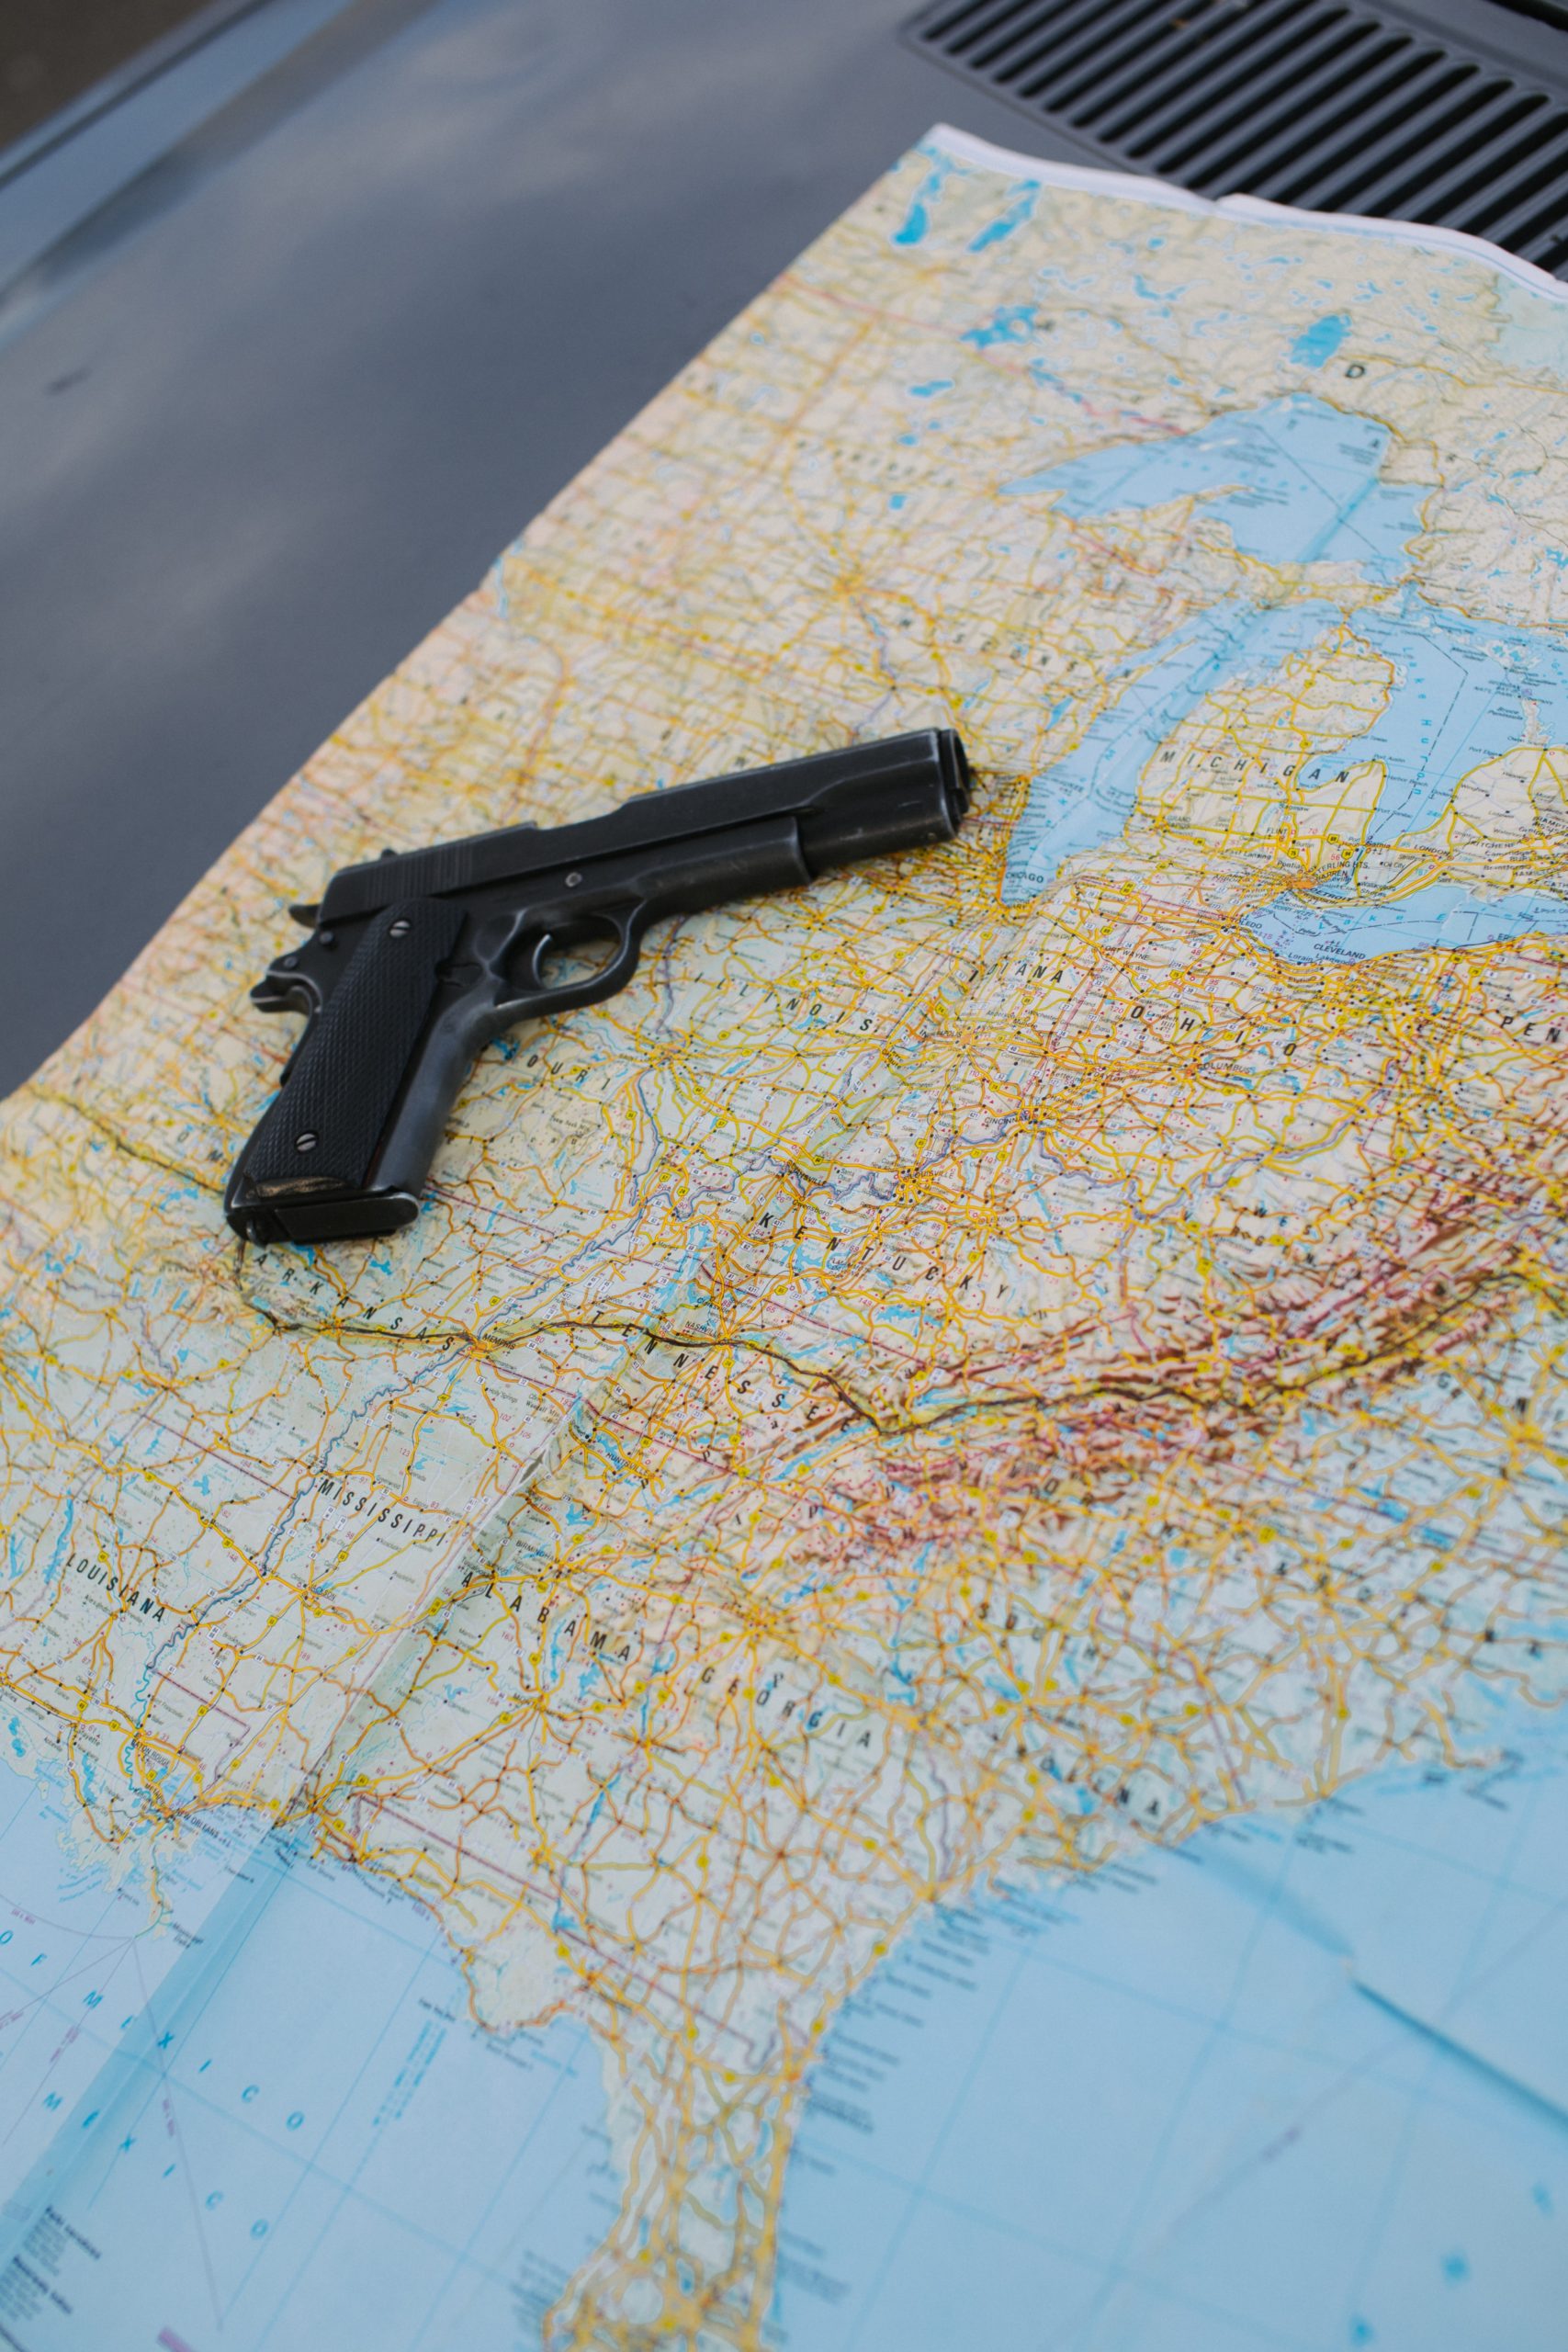 Map With A Gun On It